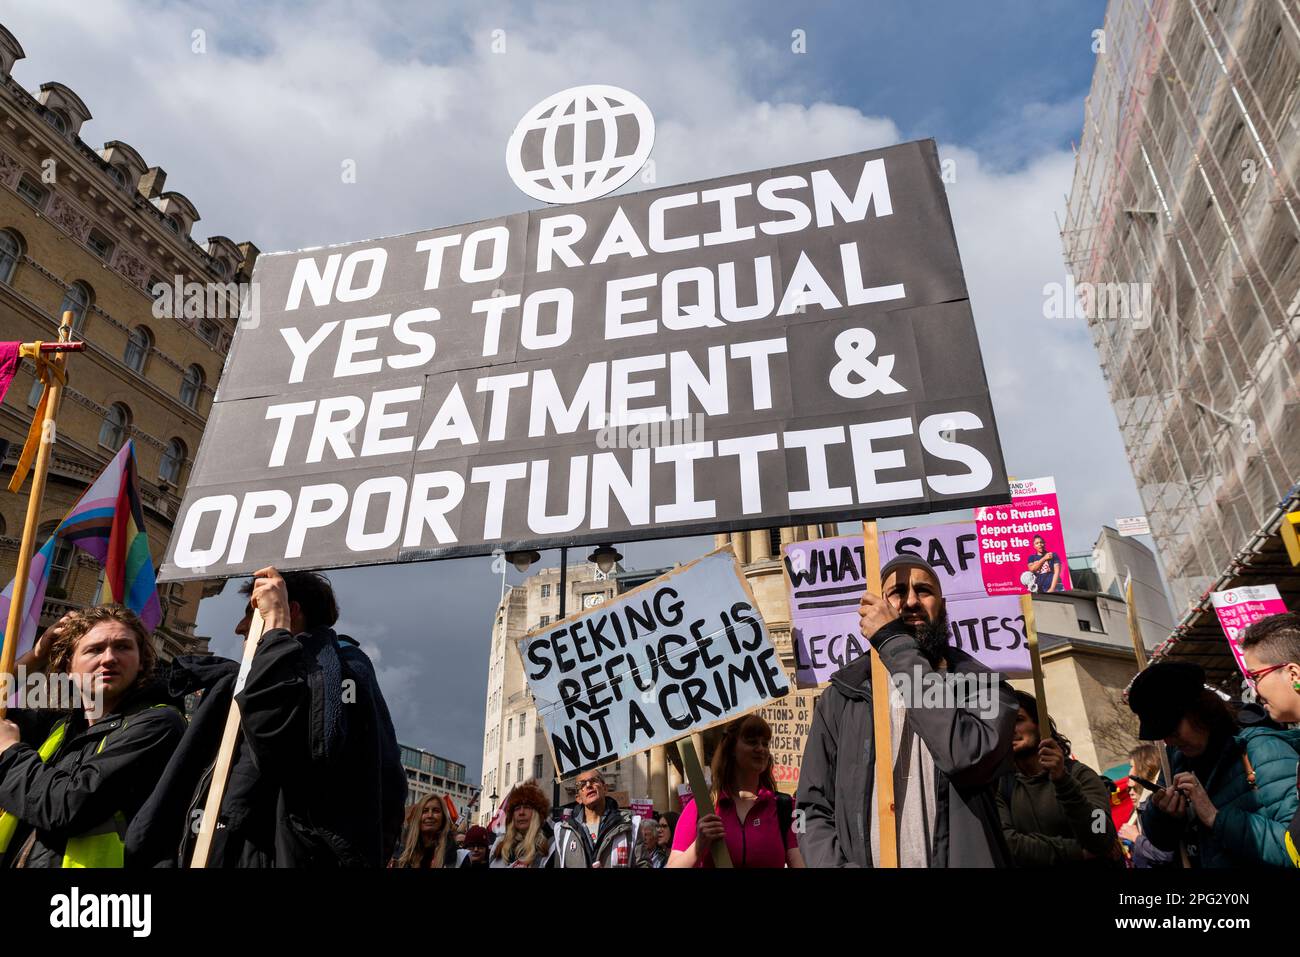 Protest taking place in London on UN Anti Racism Day. Stand up to Racism. Large placard. Equal treatment and opportunities Stock Photo